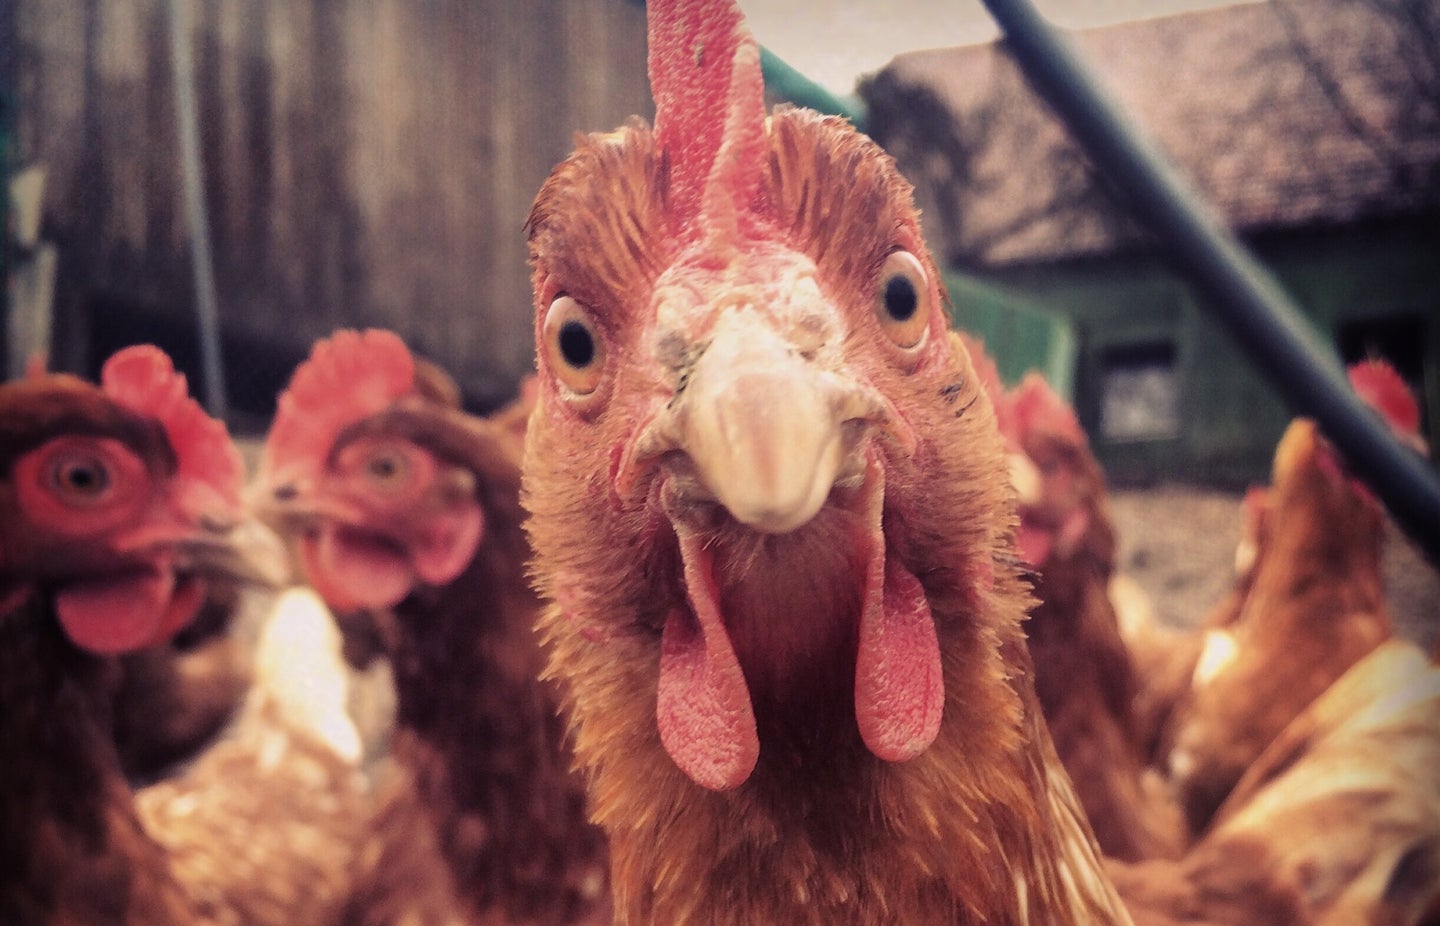 upclose picture of a chicken's face.